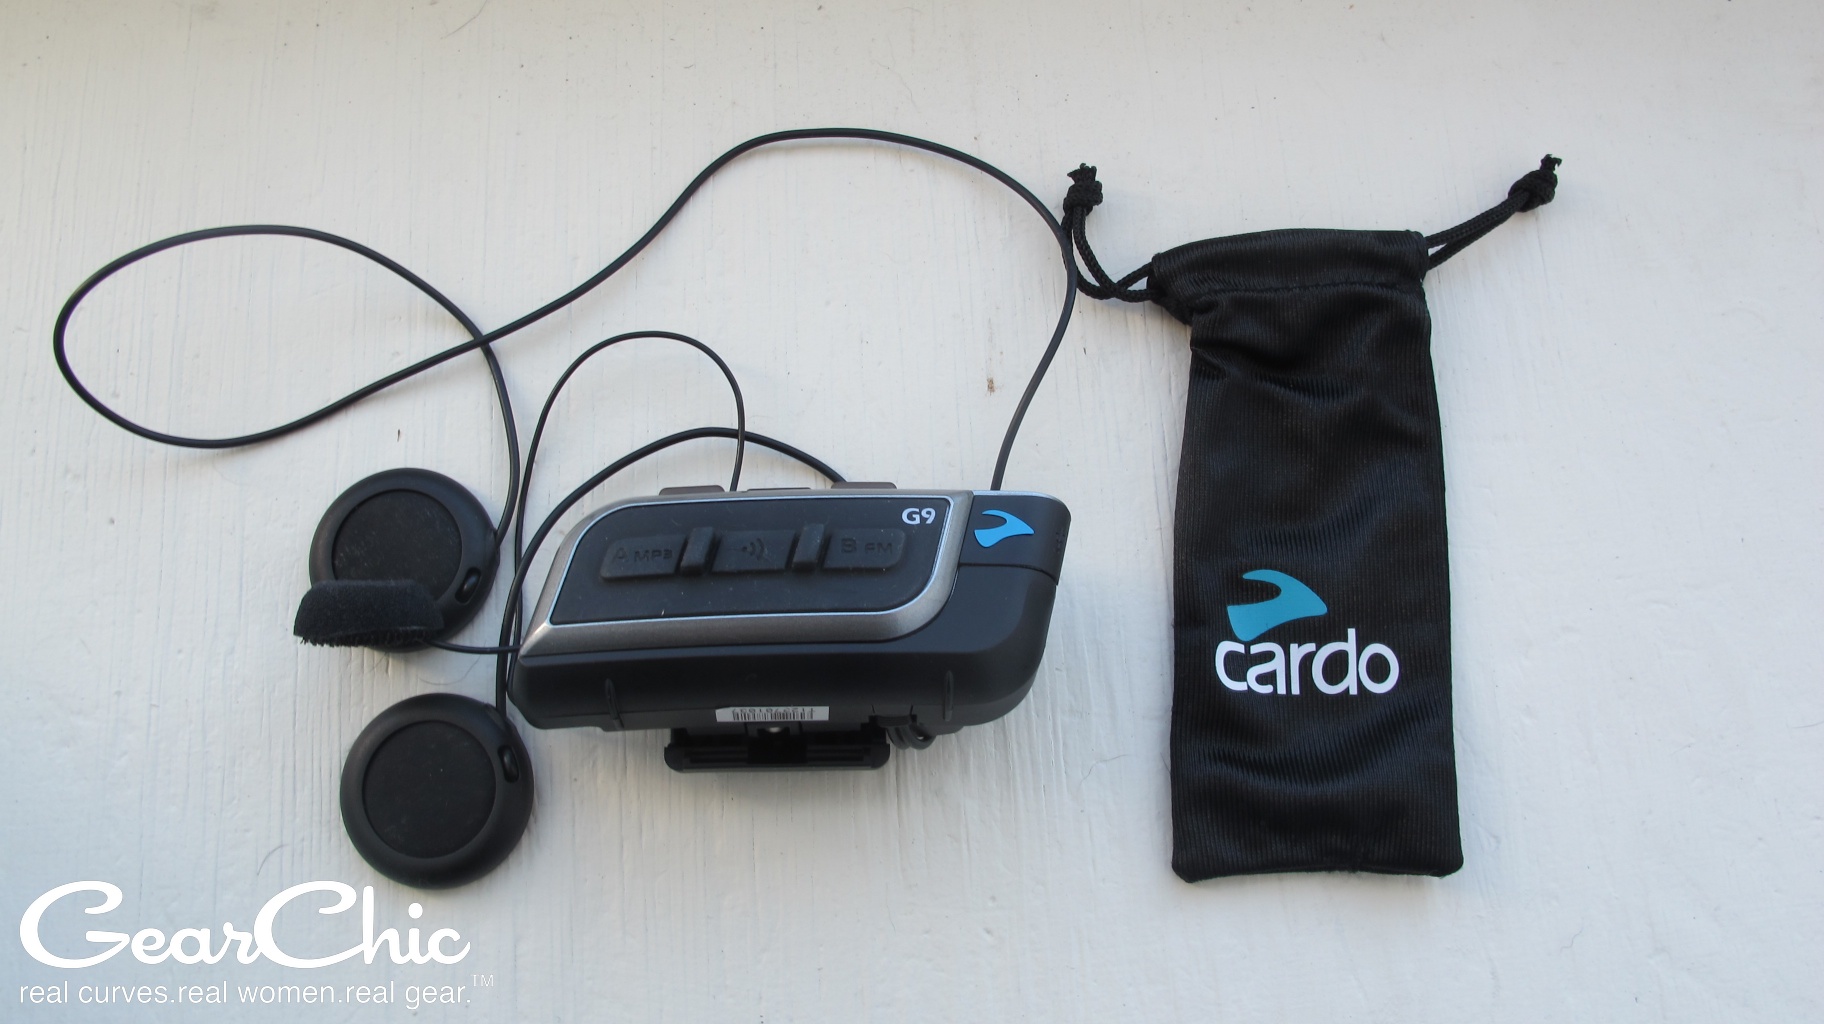 cardo-scala-rider-g9-headset-and-intercom-review-by-gearchic-gearchic